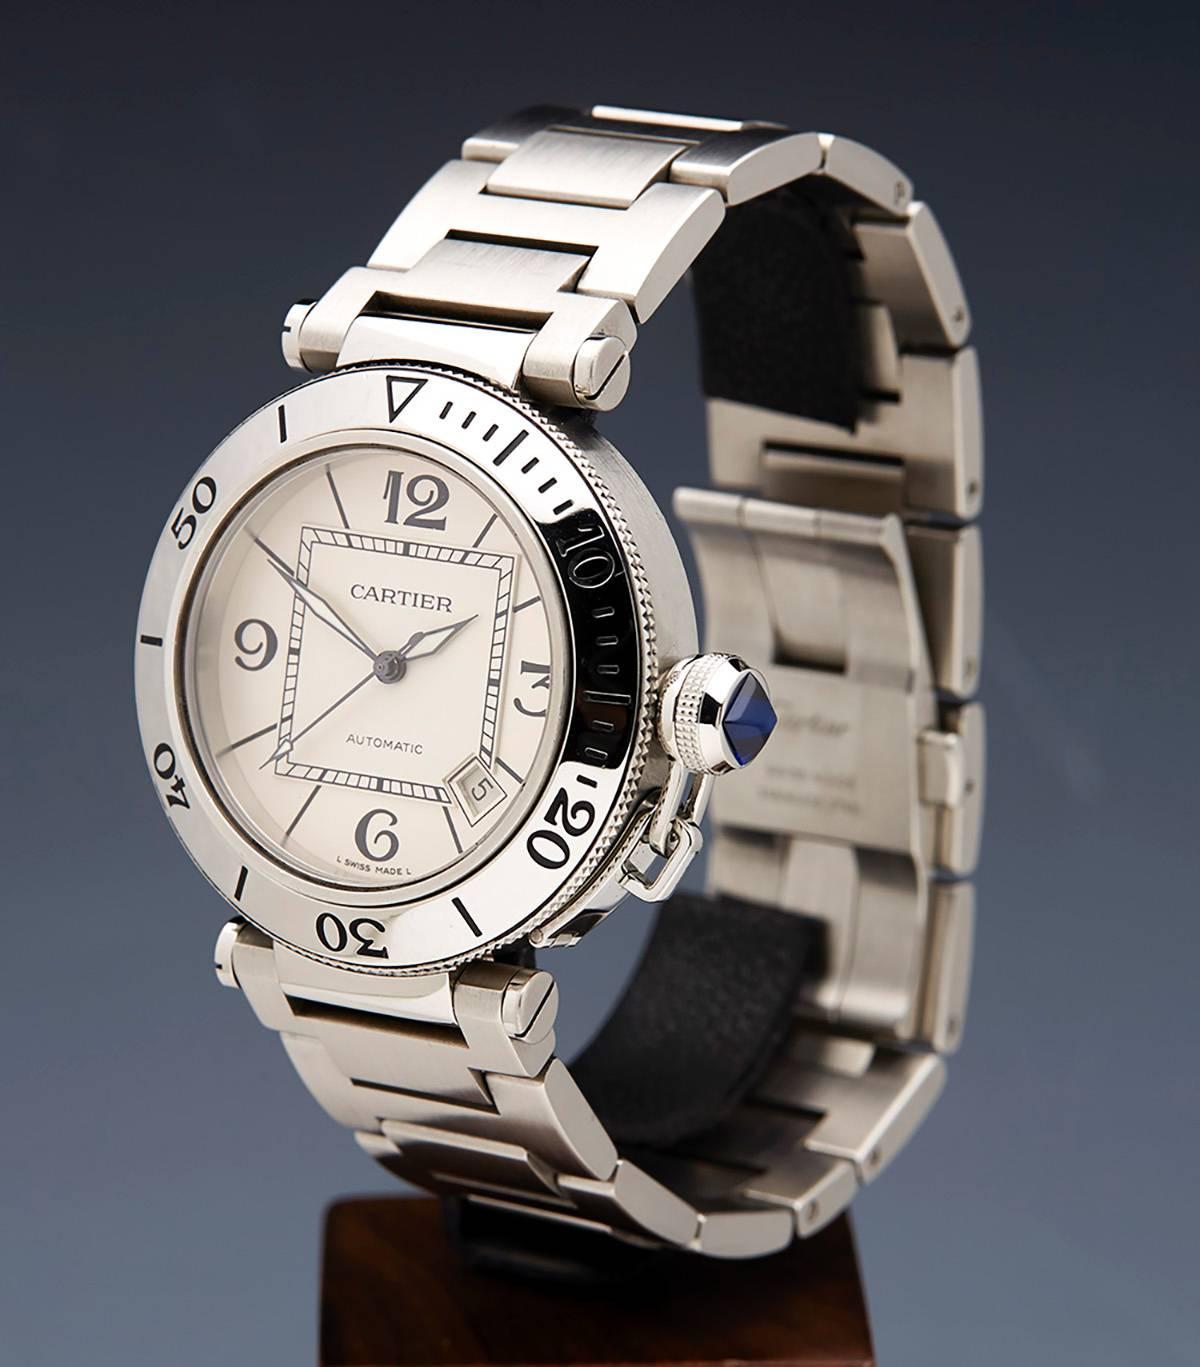 Specifications

Movement: Automatic
Case: Stainless Steel
Case Diameter: 40mm
Dial: Silver
Bracelet: Stainless Steel
Buckle: Stainless Steel Deployment Buckle
Glass: Sapphire Crystal
Water Resistance: To Manufacturers Specification 
Age: